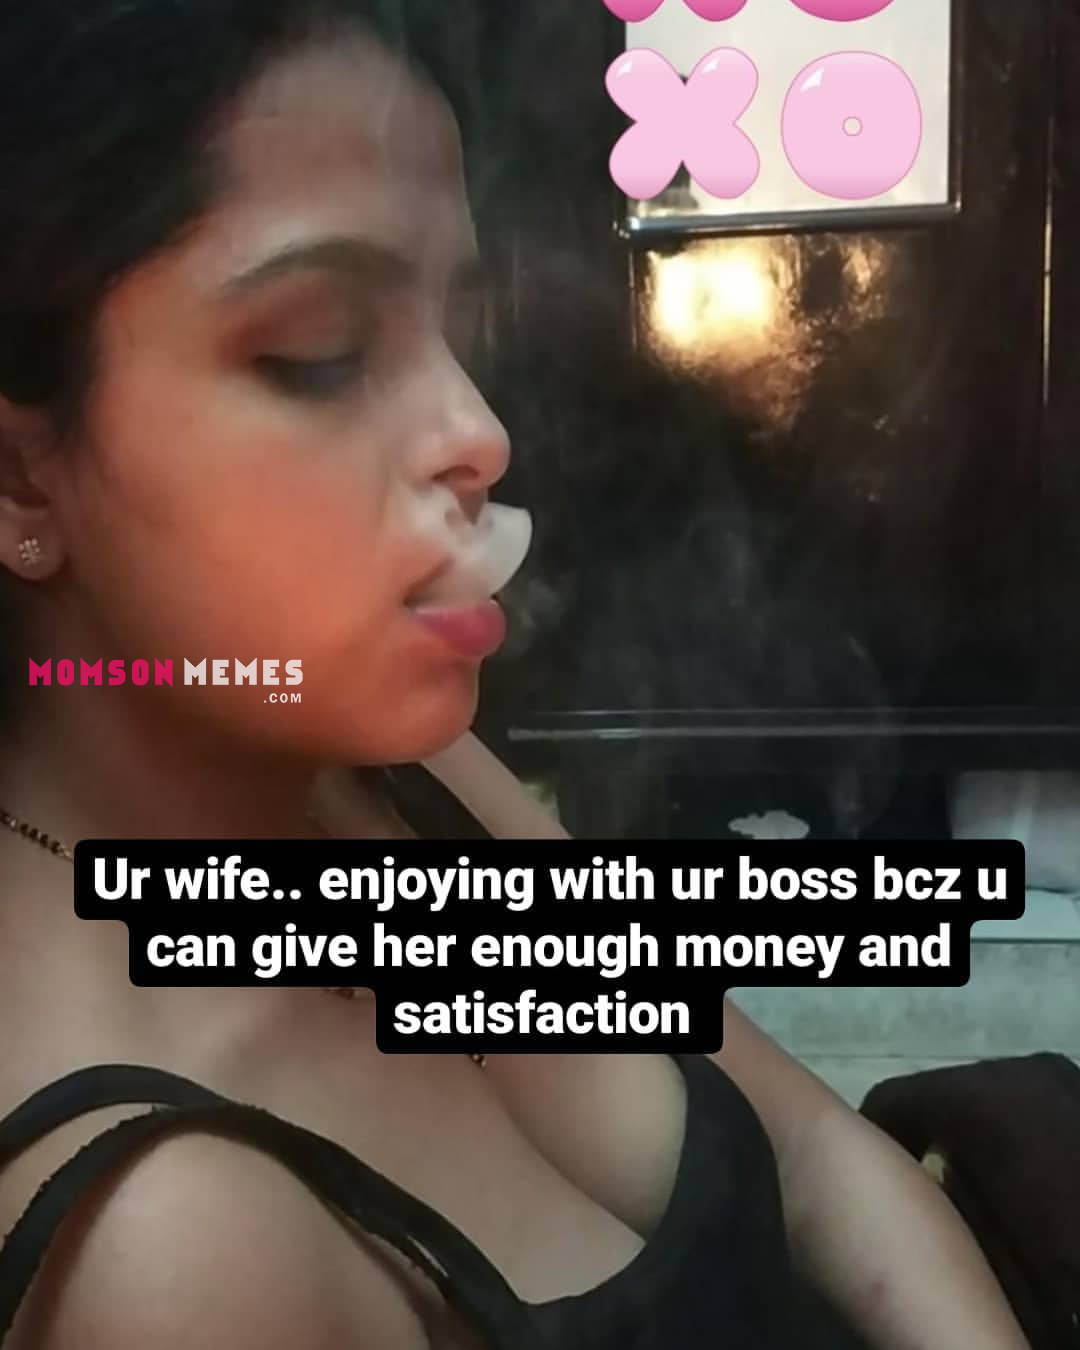 Sex Boss Wife Porn Captions - Wife enjoying with your boss! - Incest Mom Son Captions Memes